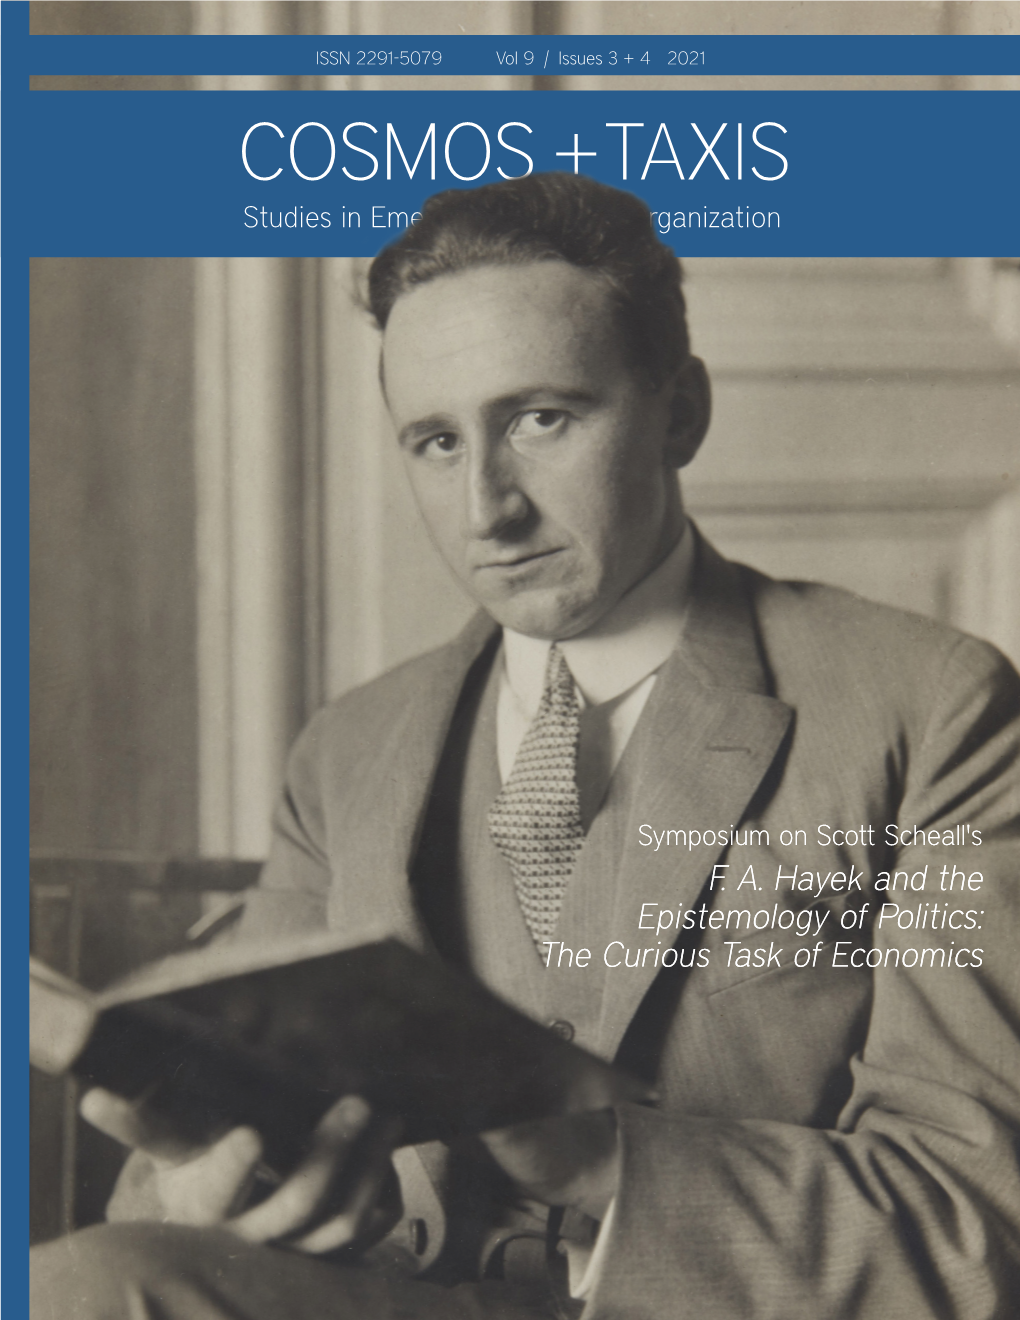 COSMOS + TAXIS | Volume 9 Issue 3+4 2021